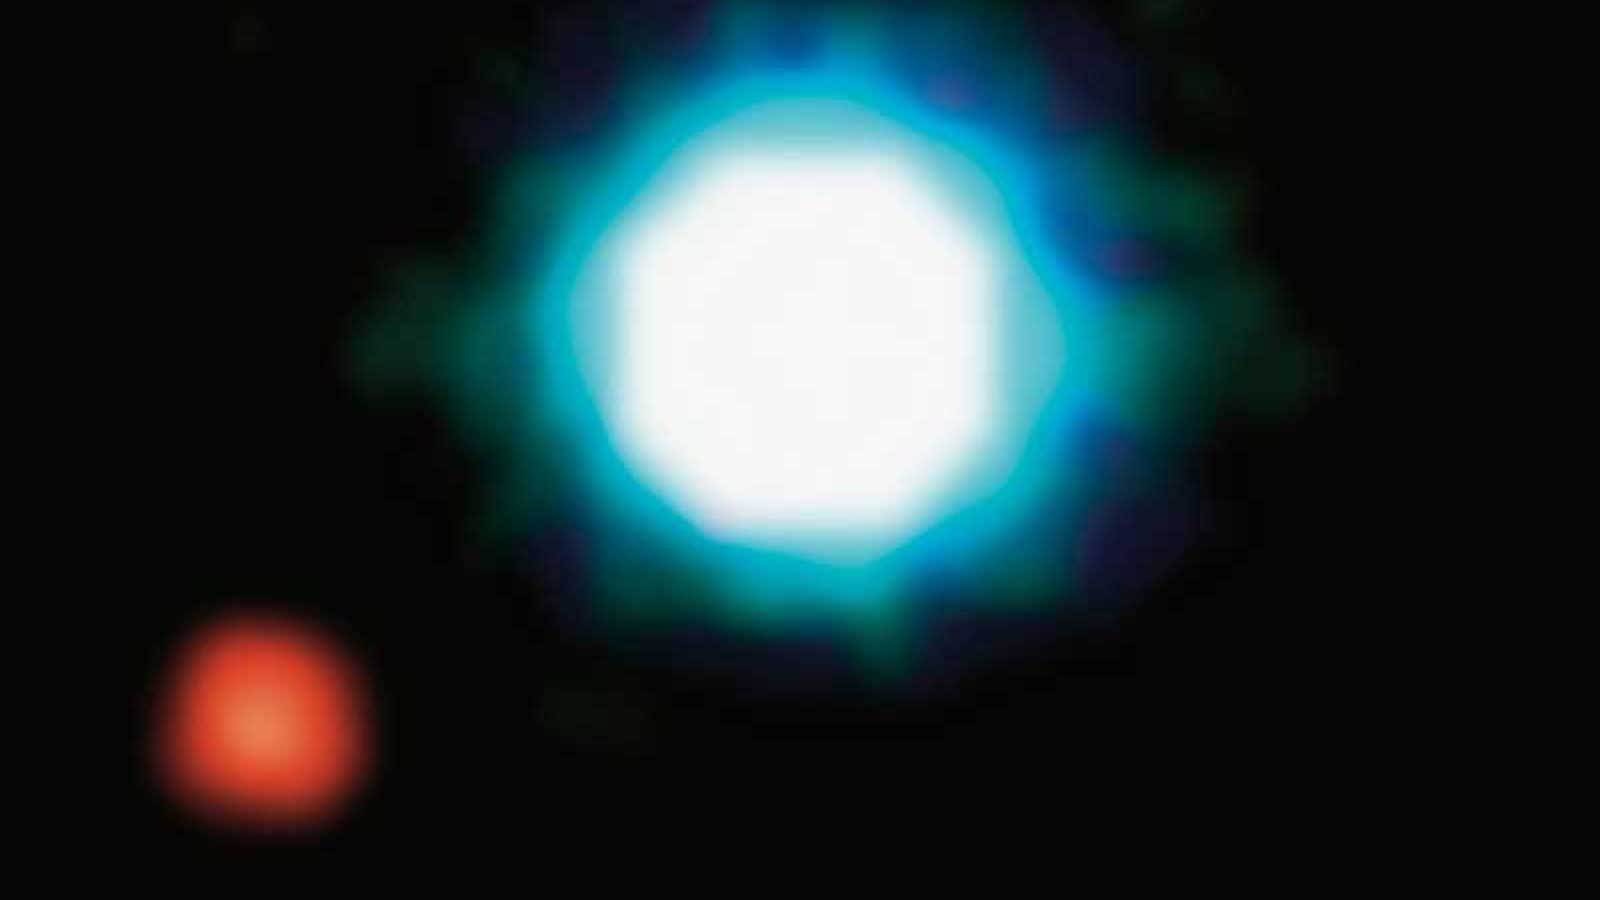 slide 3 - A large, bright star is seen with a smaller red exoplanet.